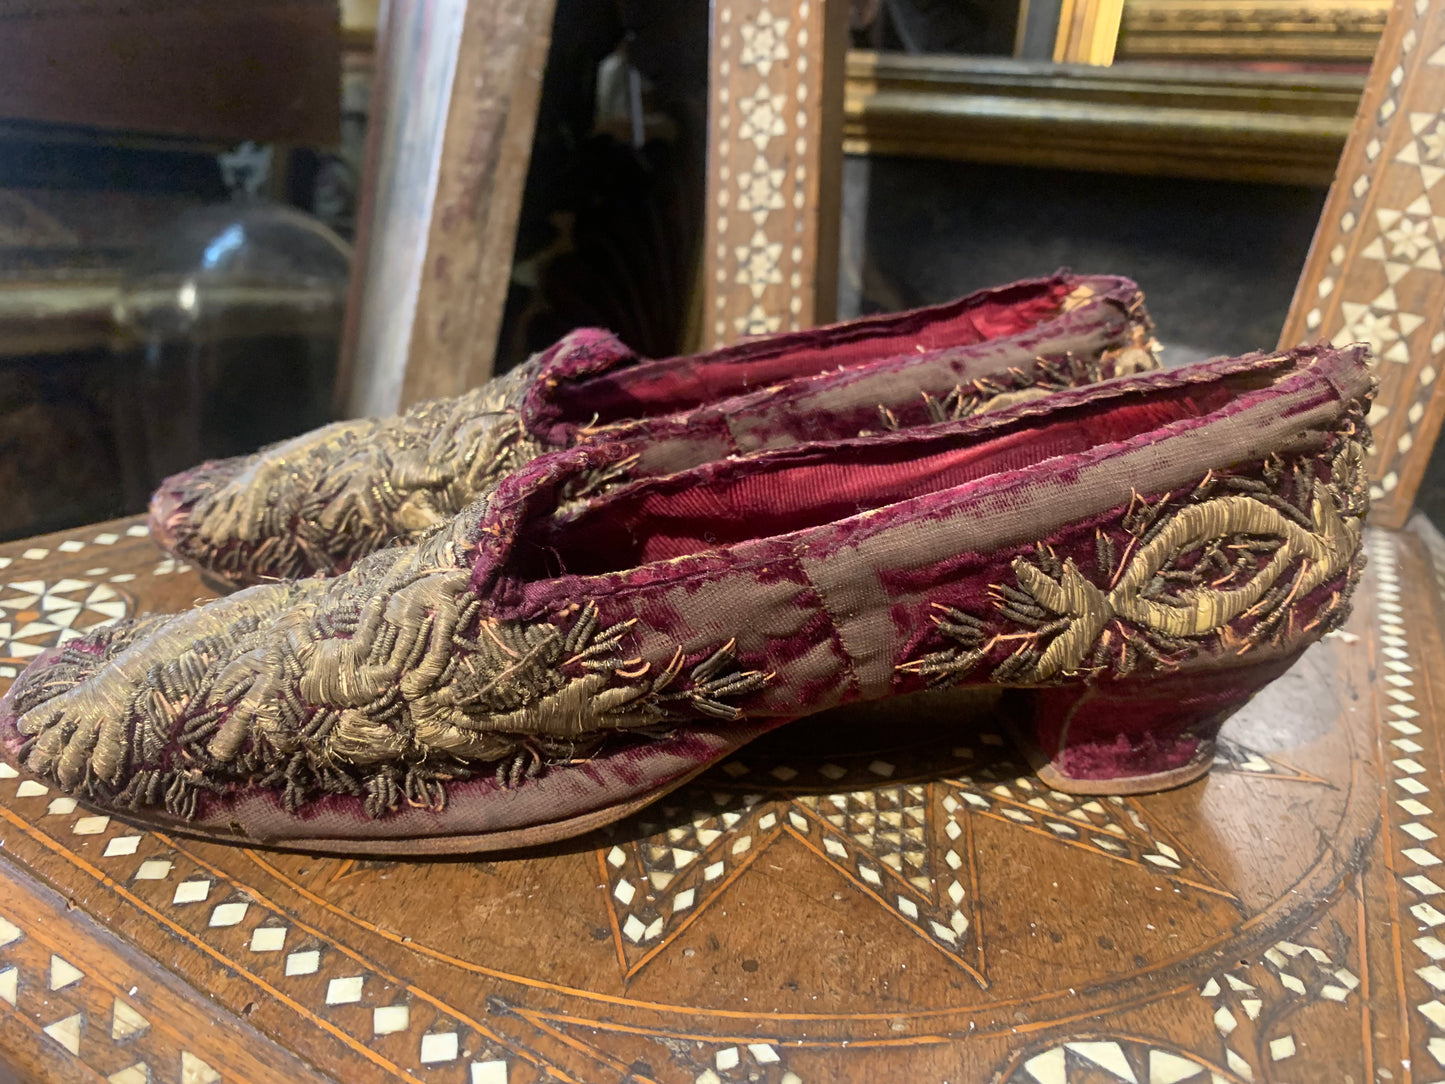 Ottoman empire slippers with gold thread padded embroidery. XIX century.